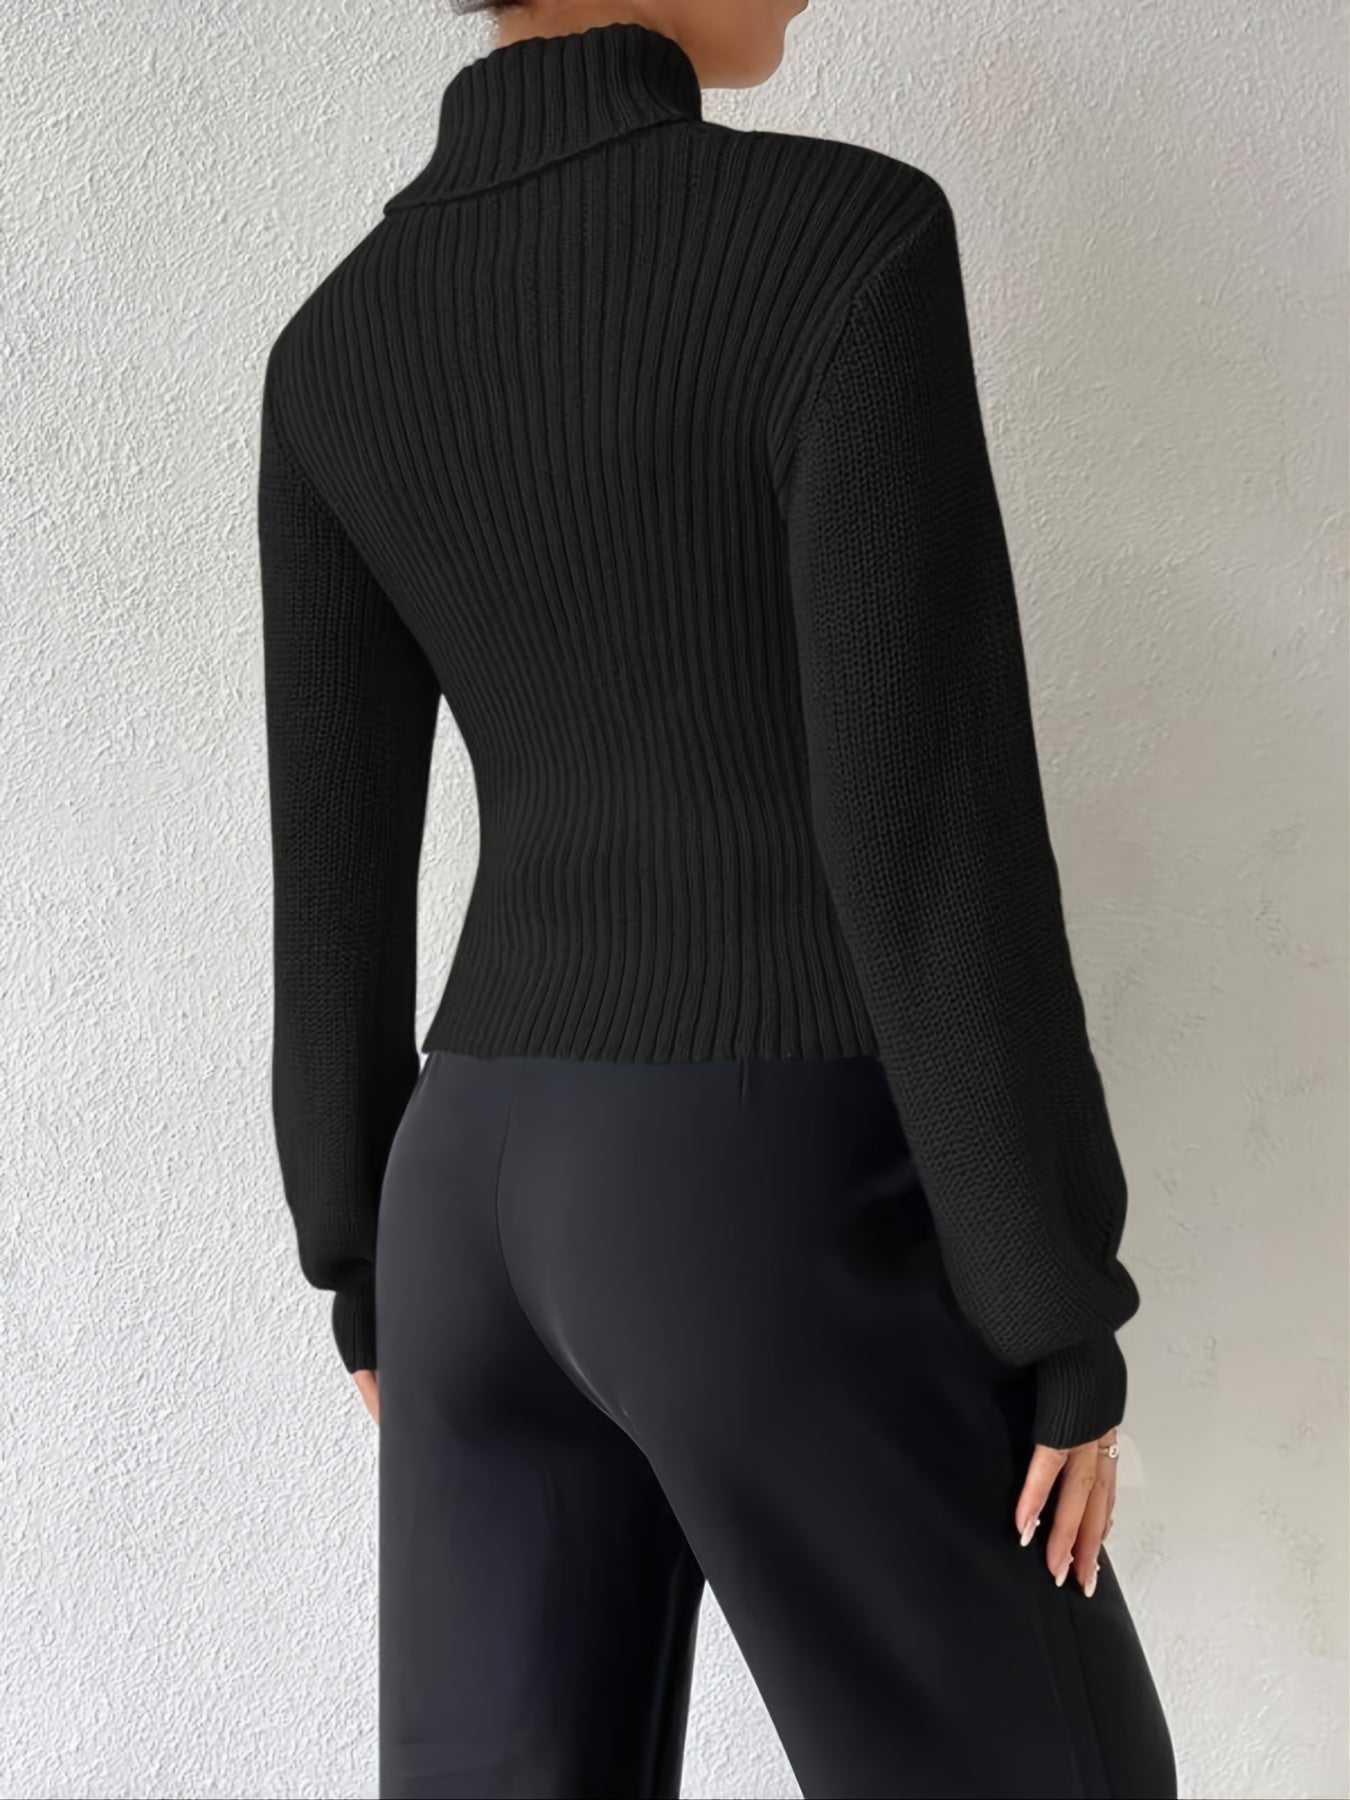 vlovelaw Solid Turtleneck Cut Out Pullover Sweater, Casual Long Sleeve Sweater For Spring & Fall, Women's Clothing